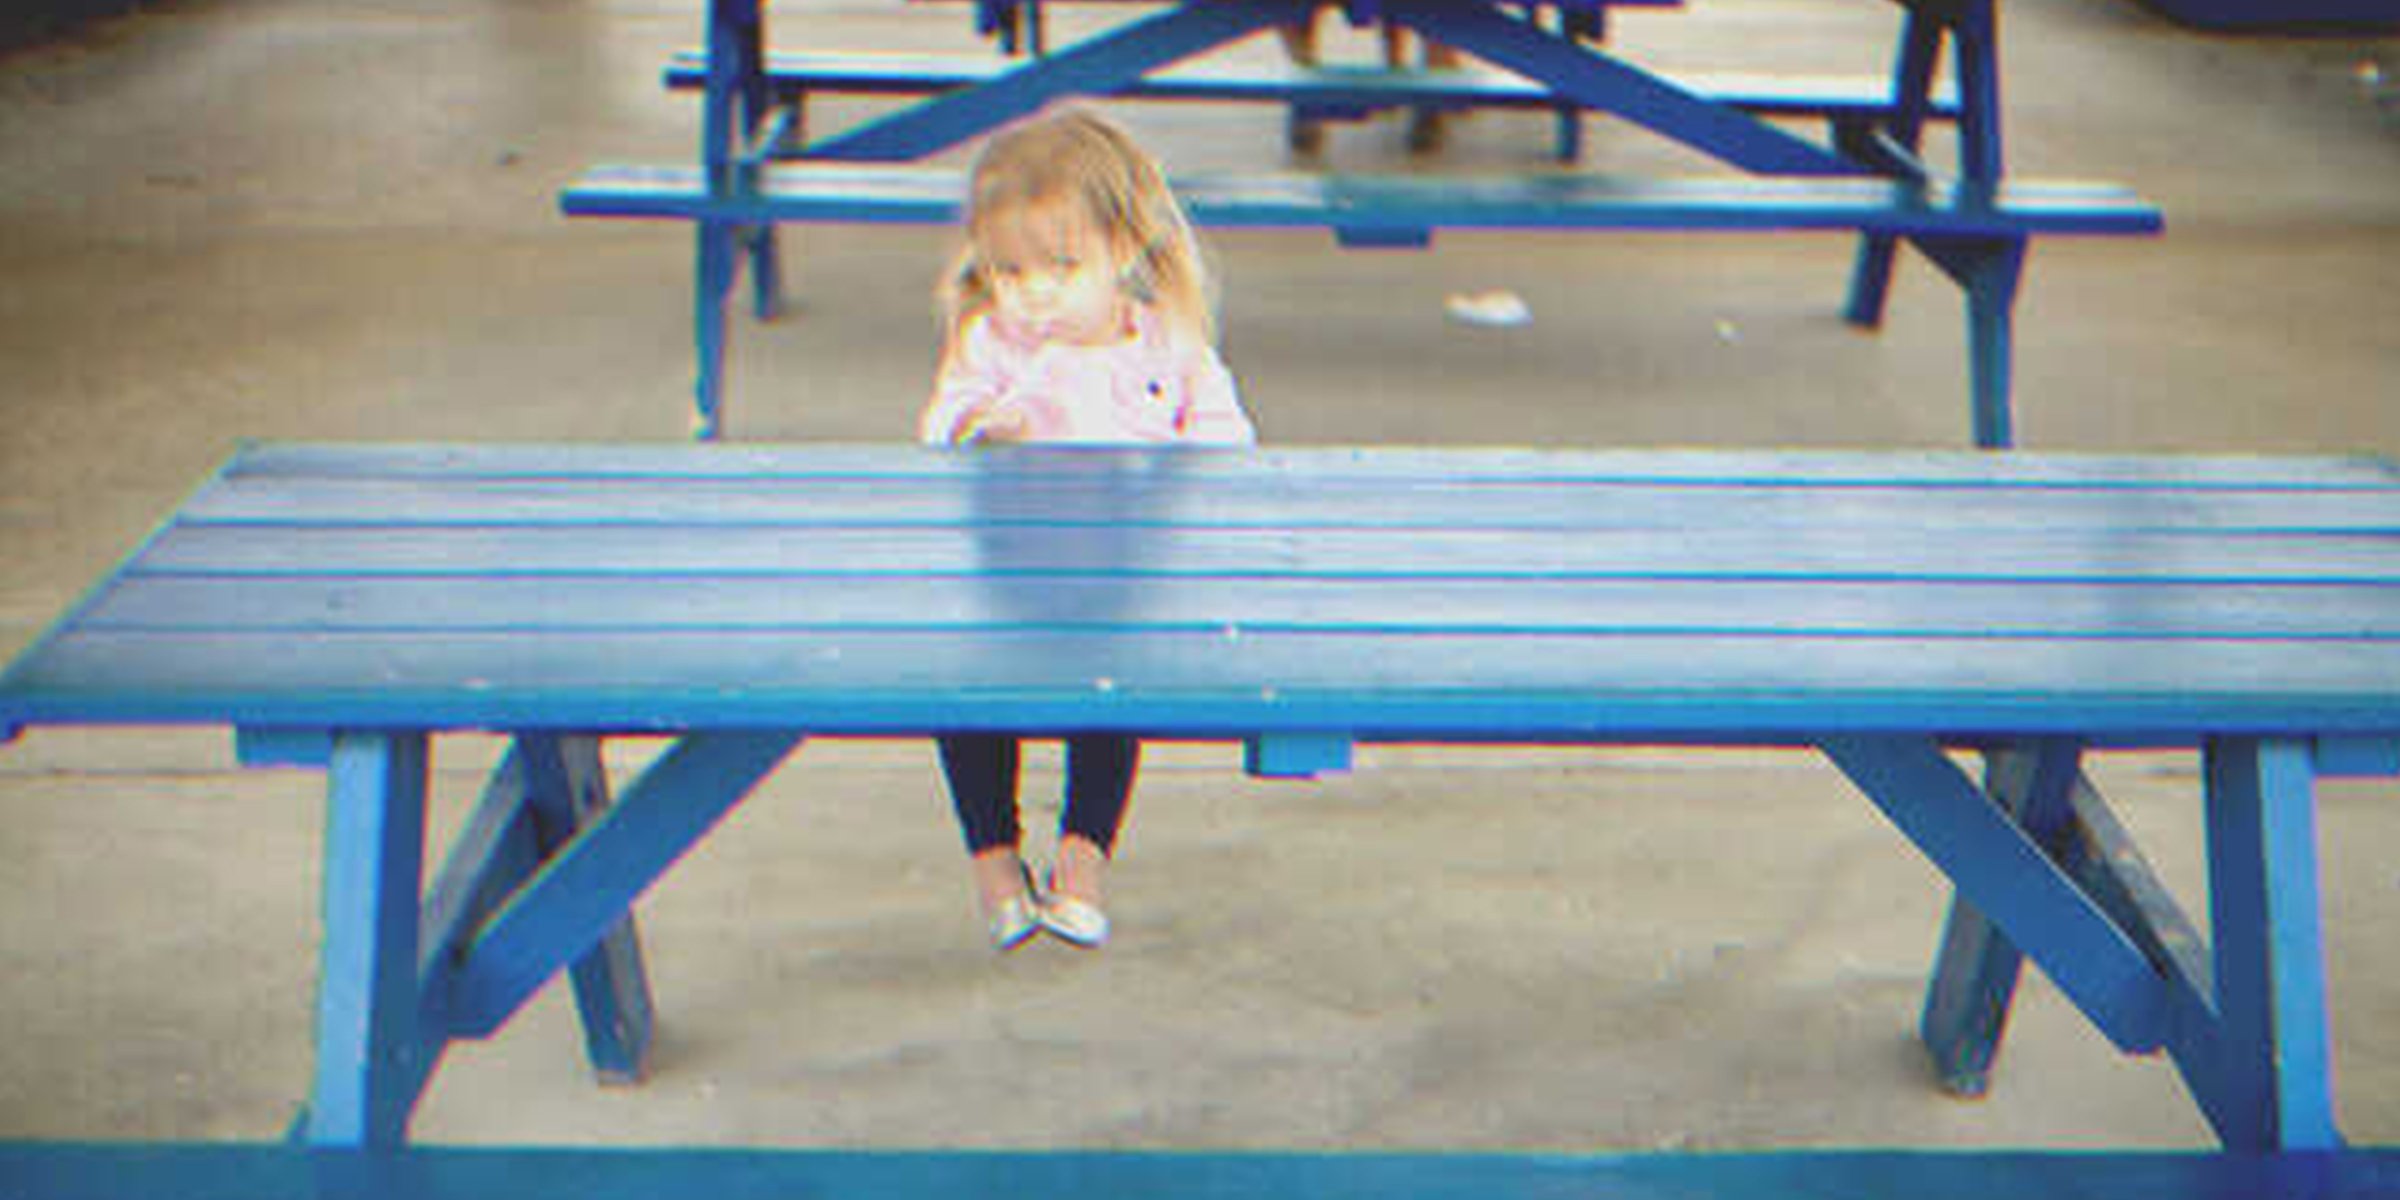 Lonely little girl sitting on a bench | Shutterstock 